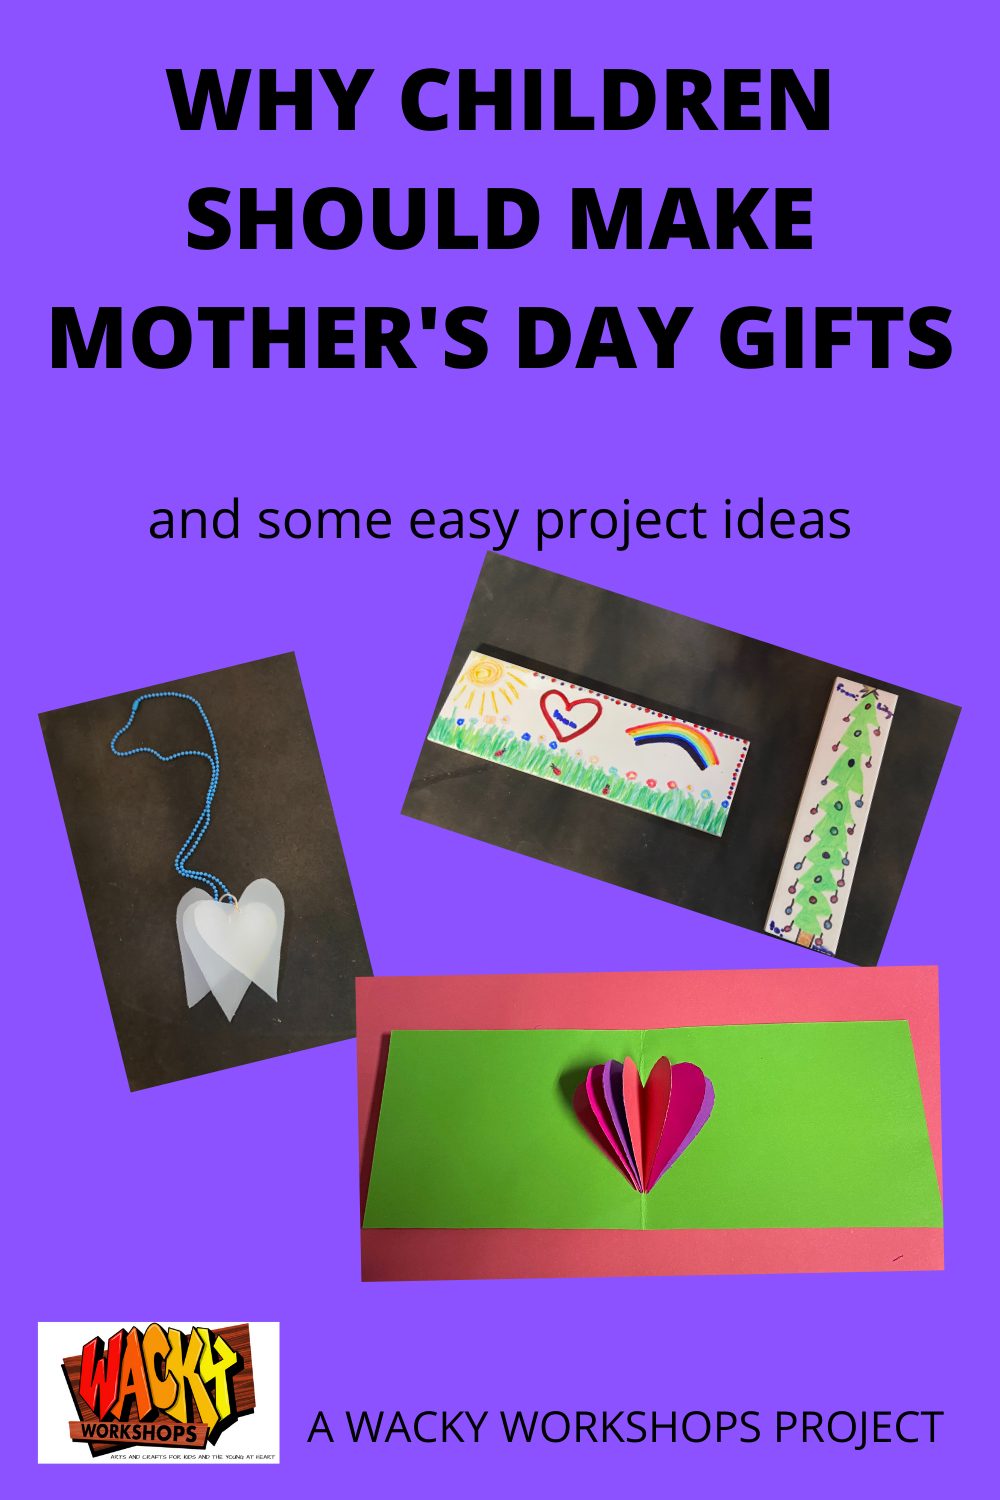 Children's Day Gifts Online, Gifts for Children - FNP